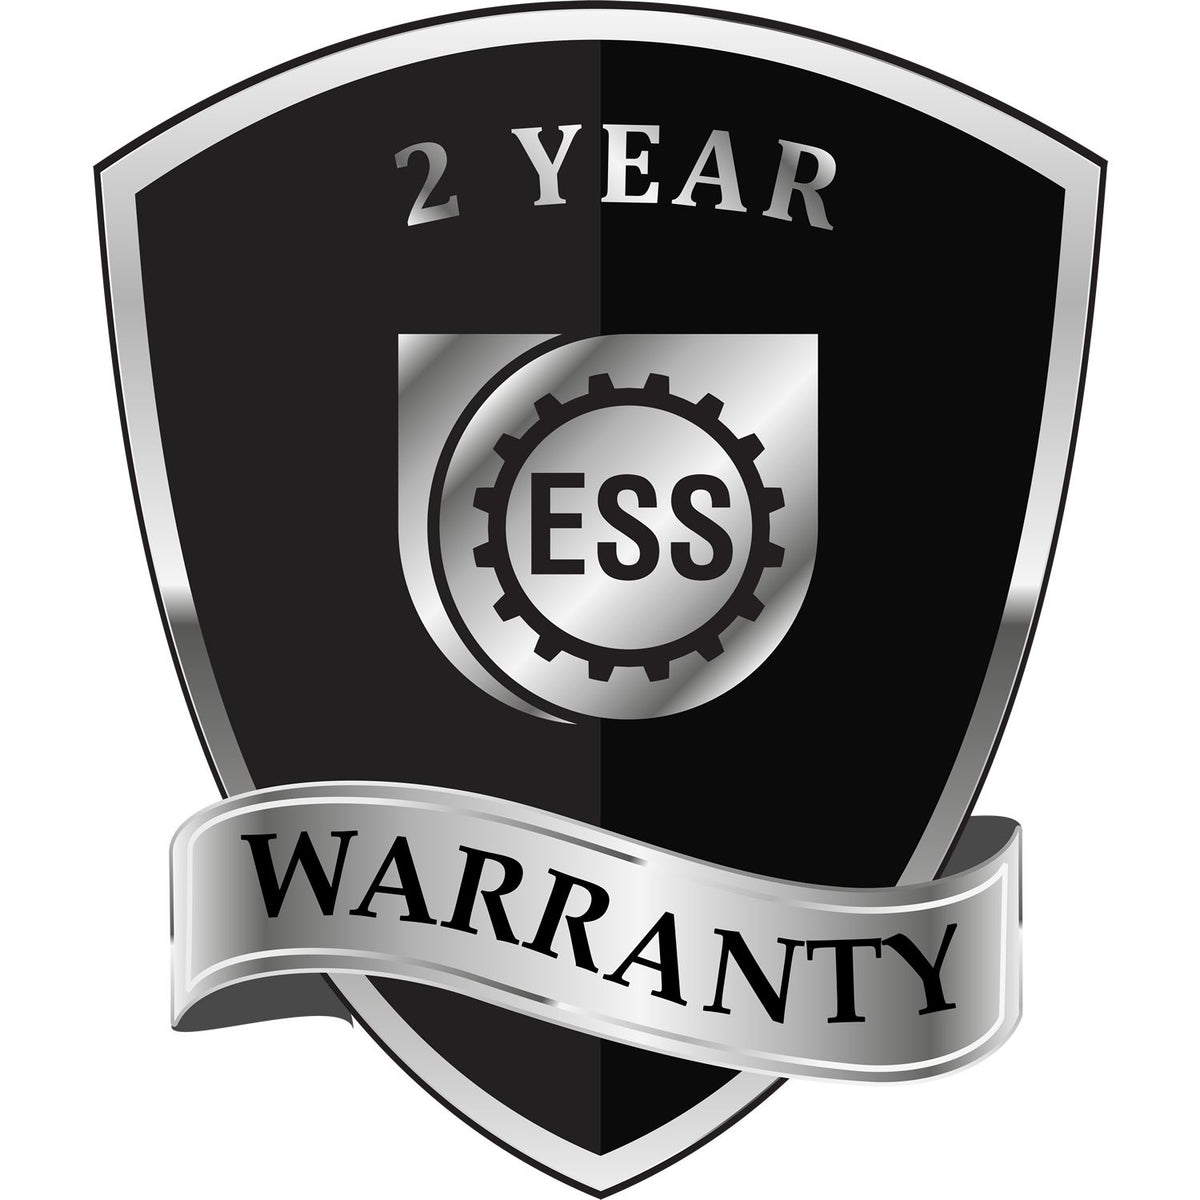 A black and silver badge or emblem showing warranty information for the Hybrid Delaware Geologist Seal